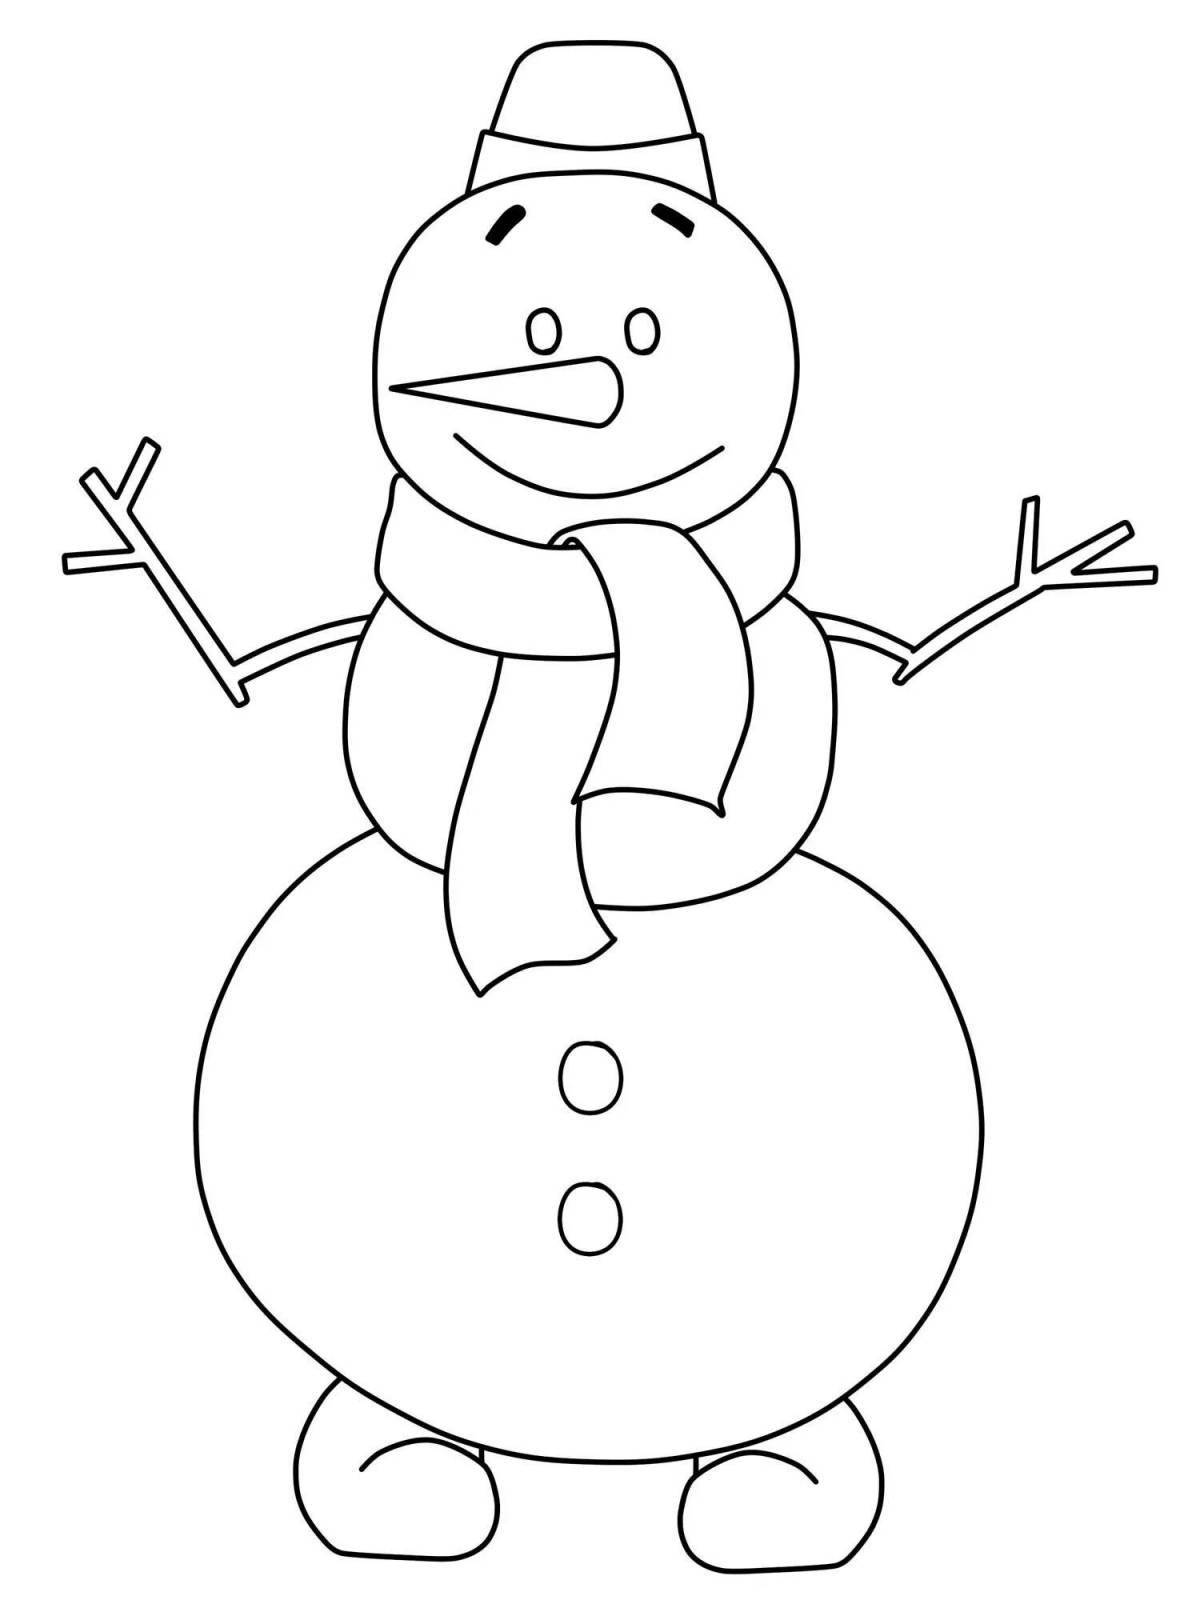 Amazing coloring book snowman in a balloon